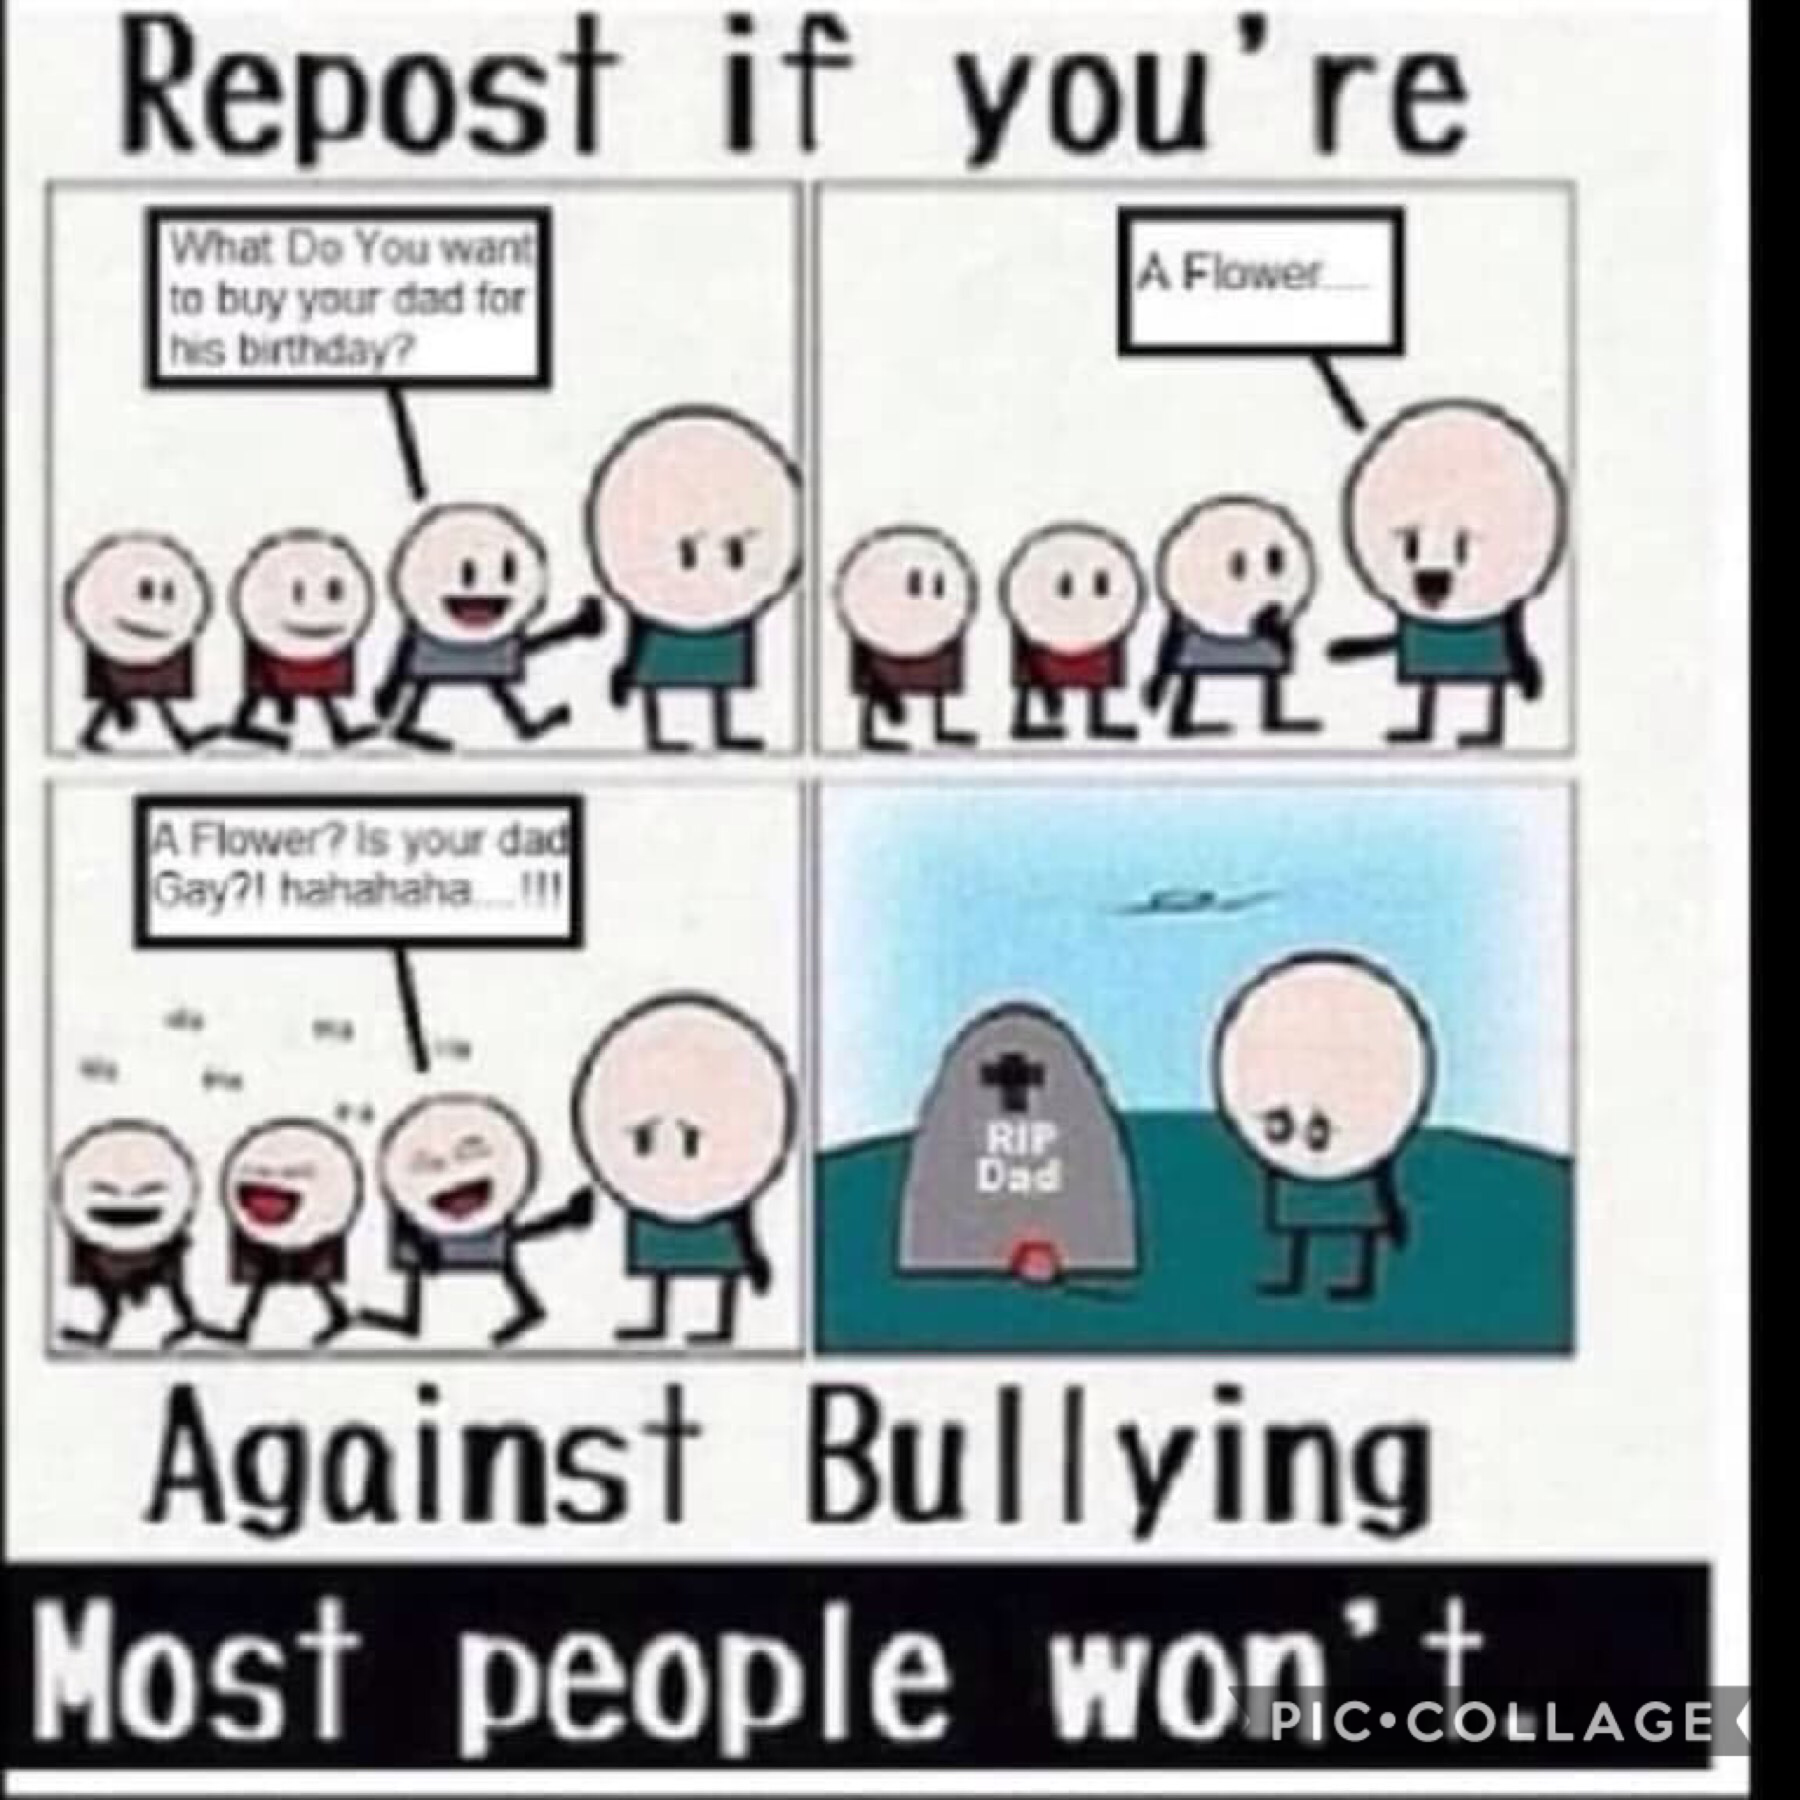 Are you against Bullying?